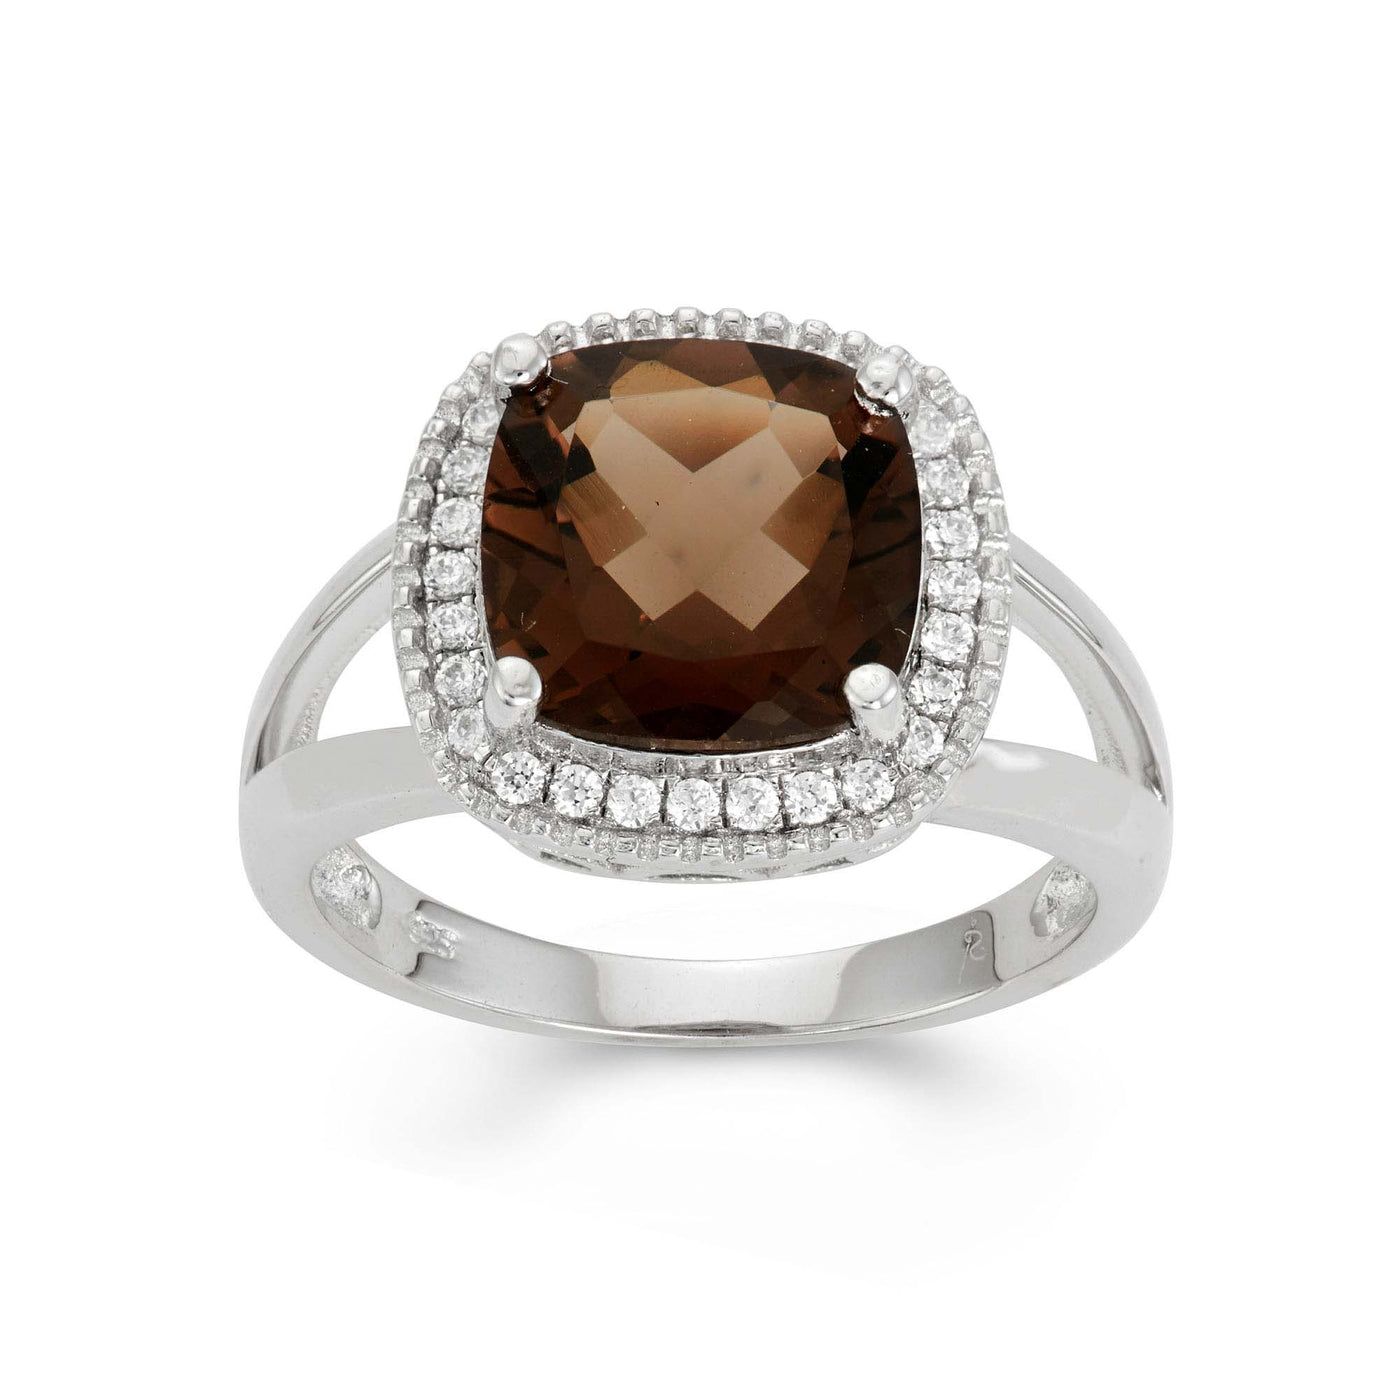 Rebecca Sloane Silver Ring With Square Faceted Smoky Topaz & CZ